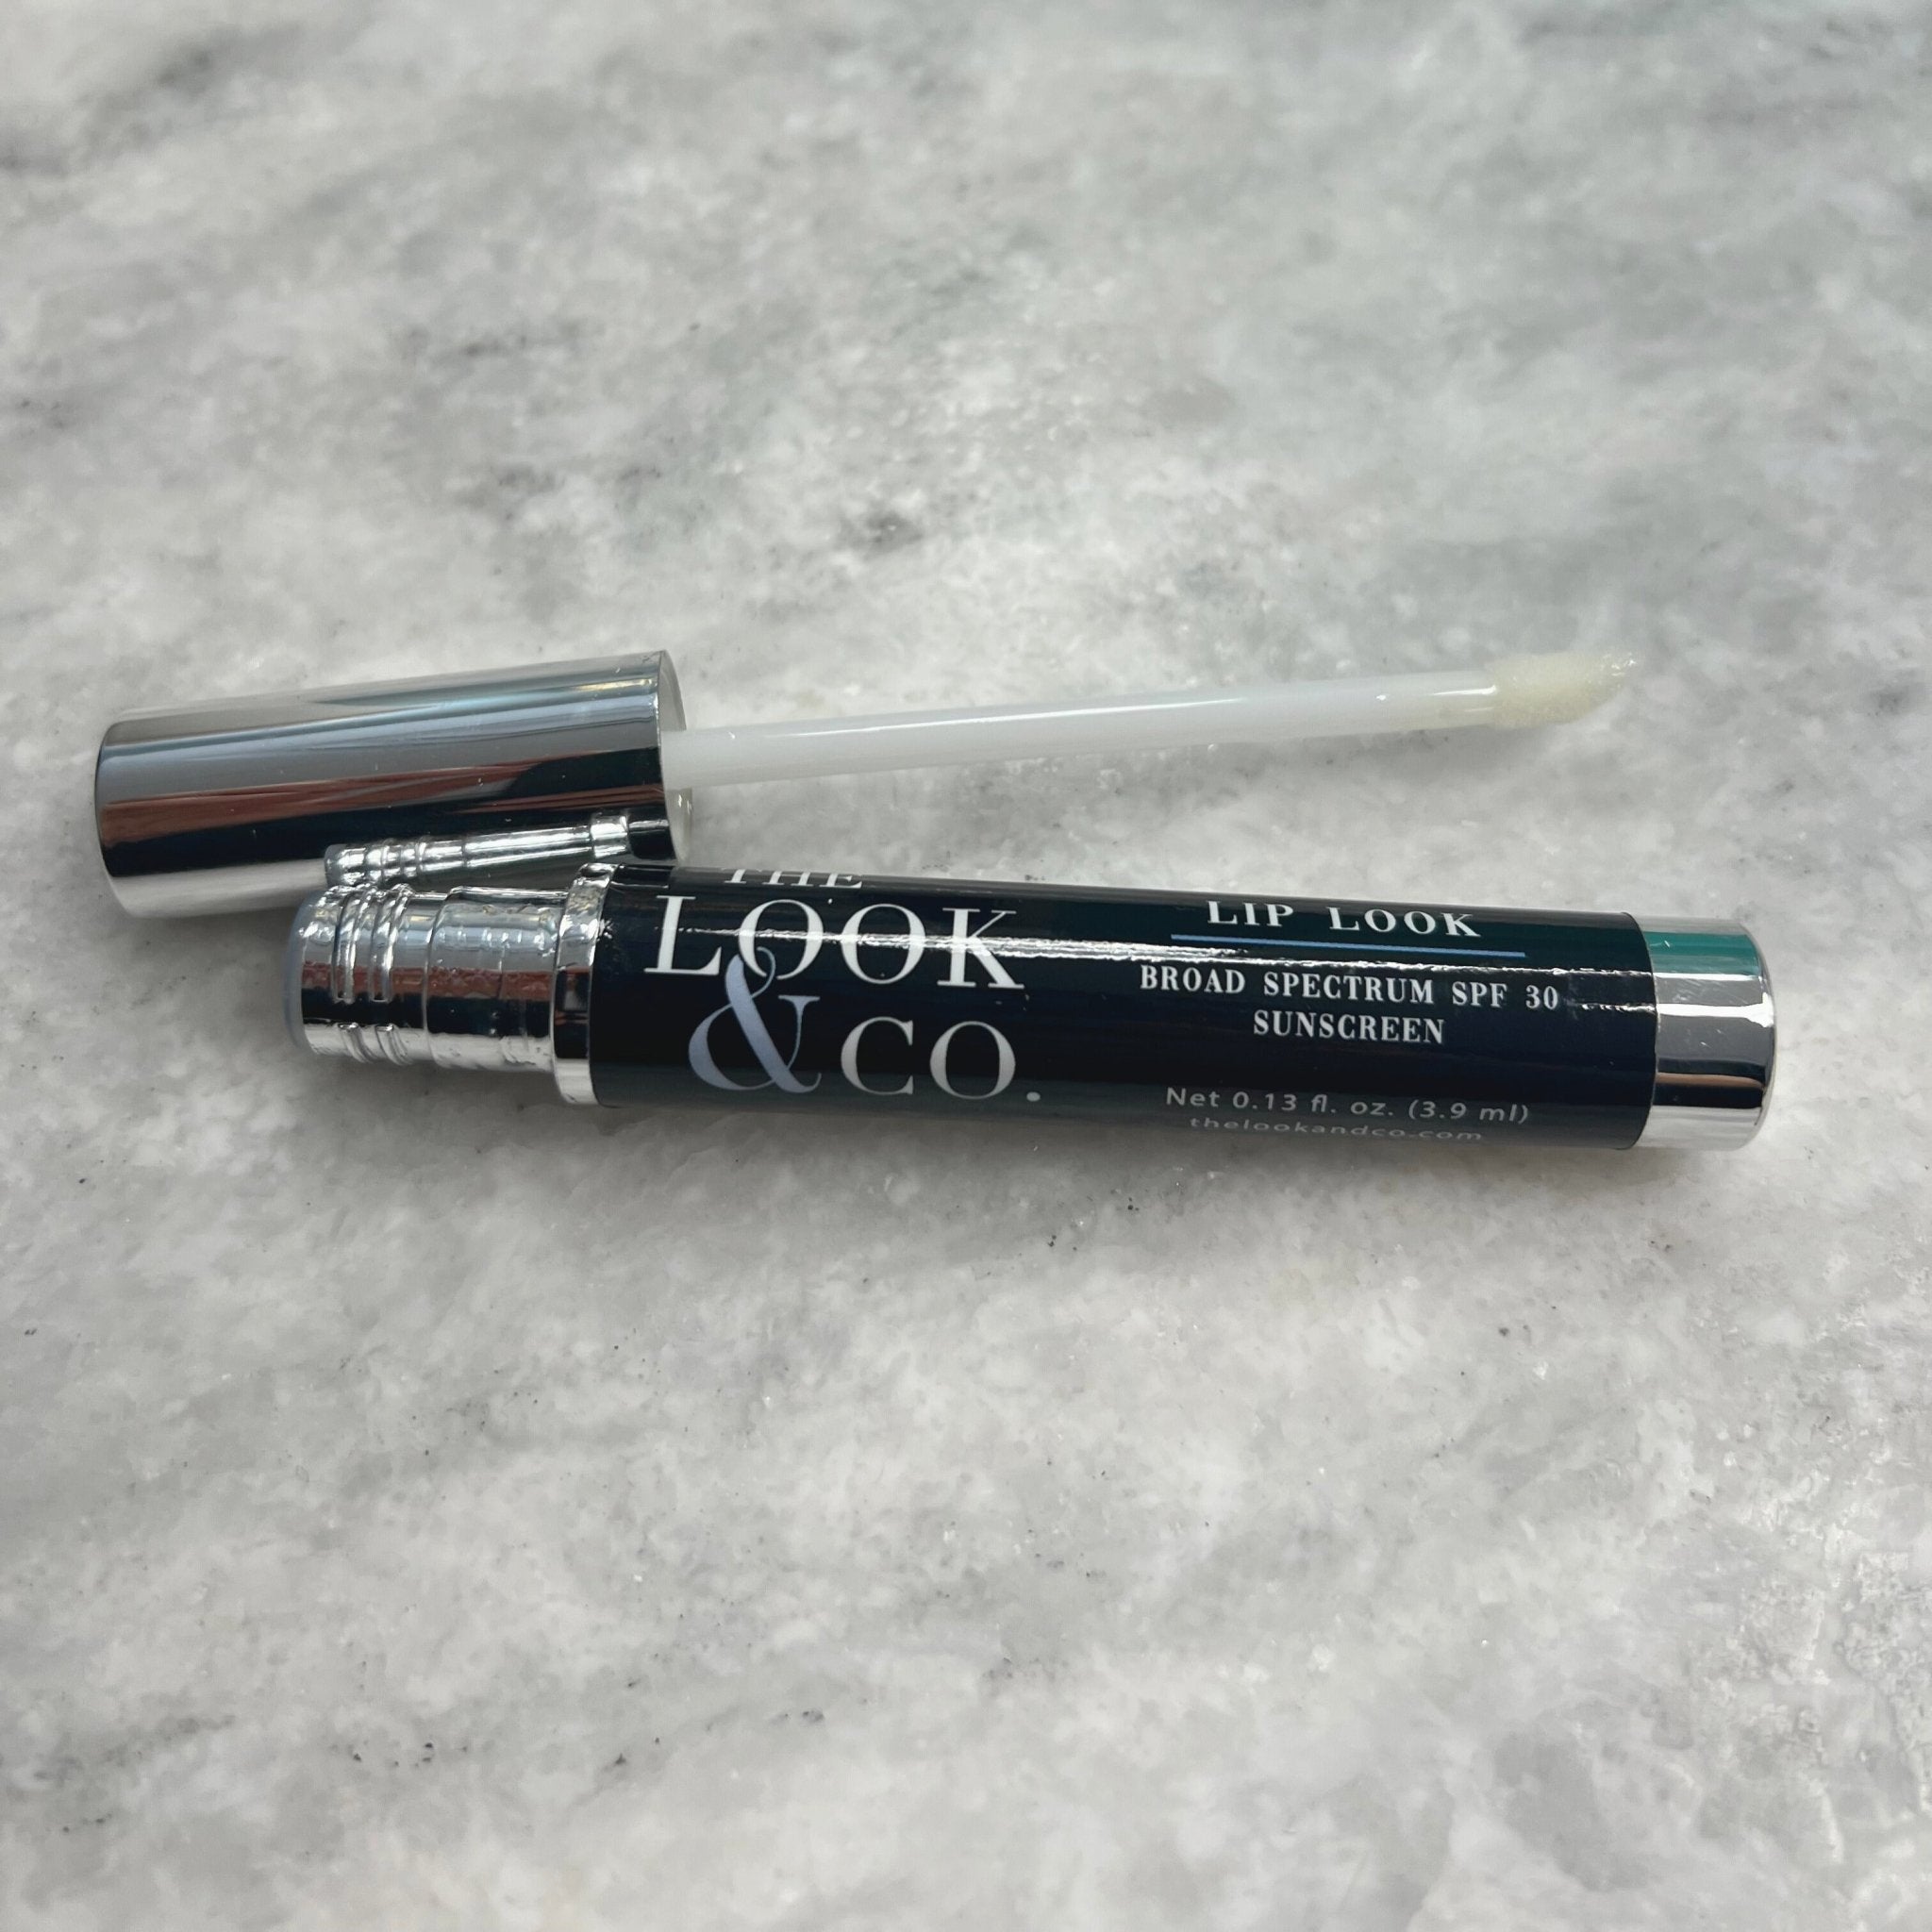 The Lip Look: A Plumping Lip Treatment - The Look and Co